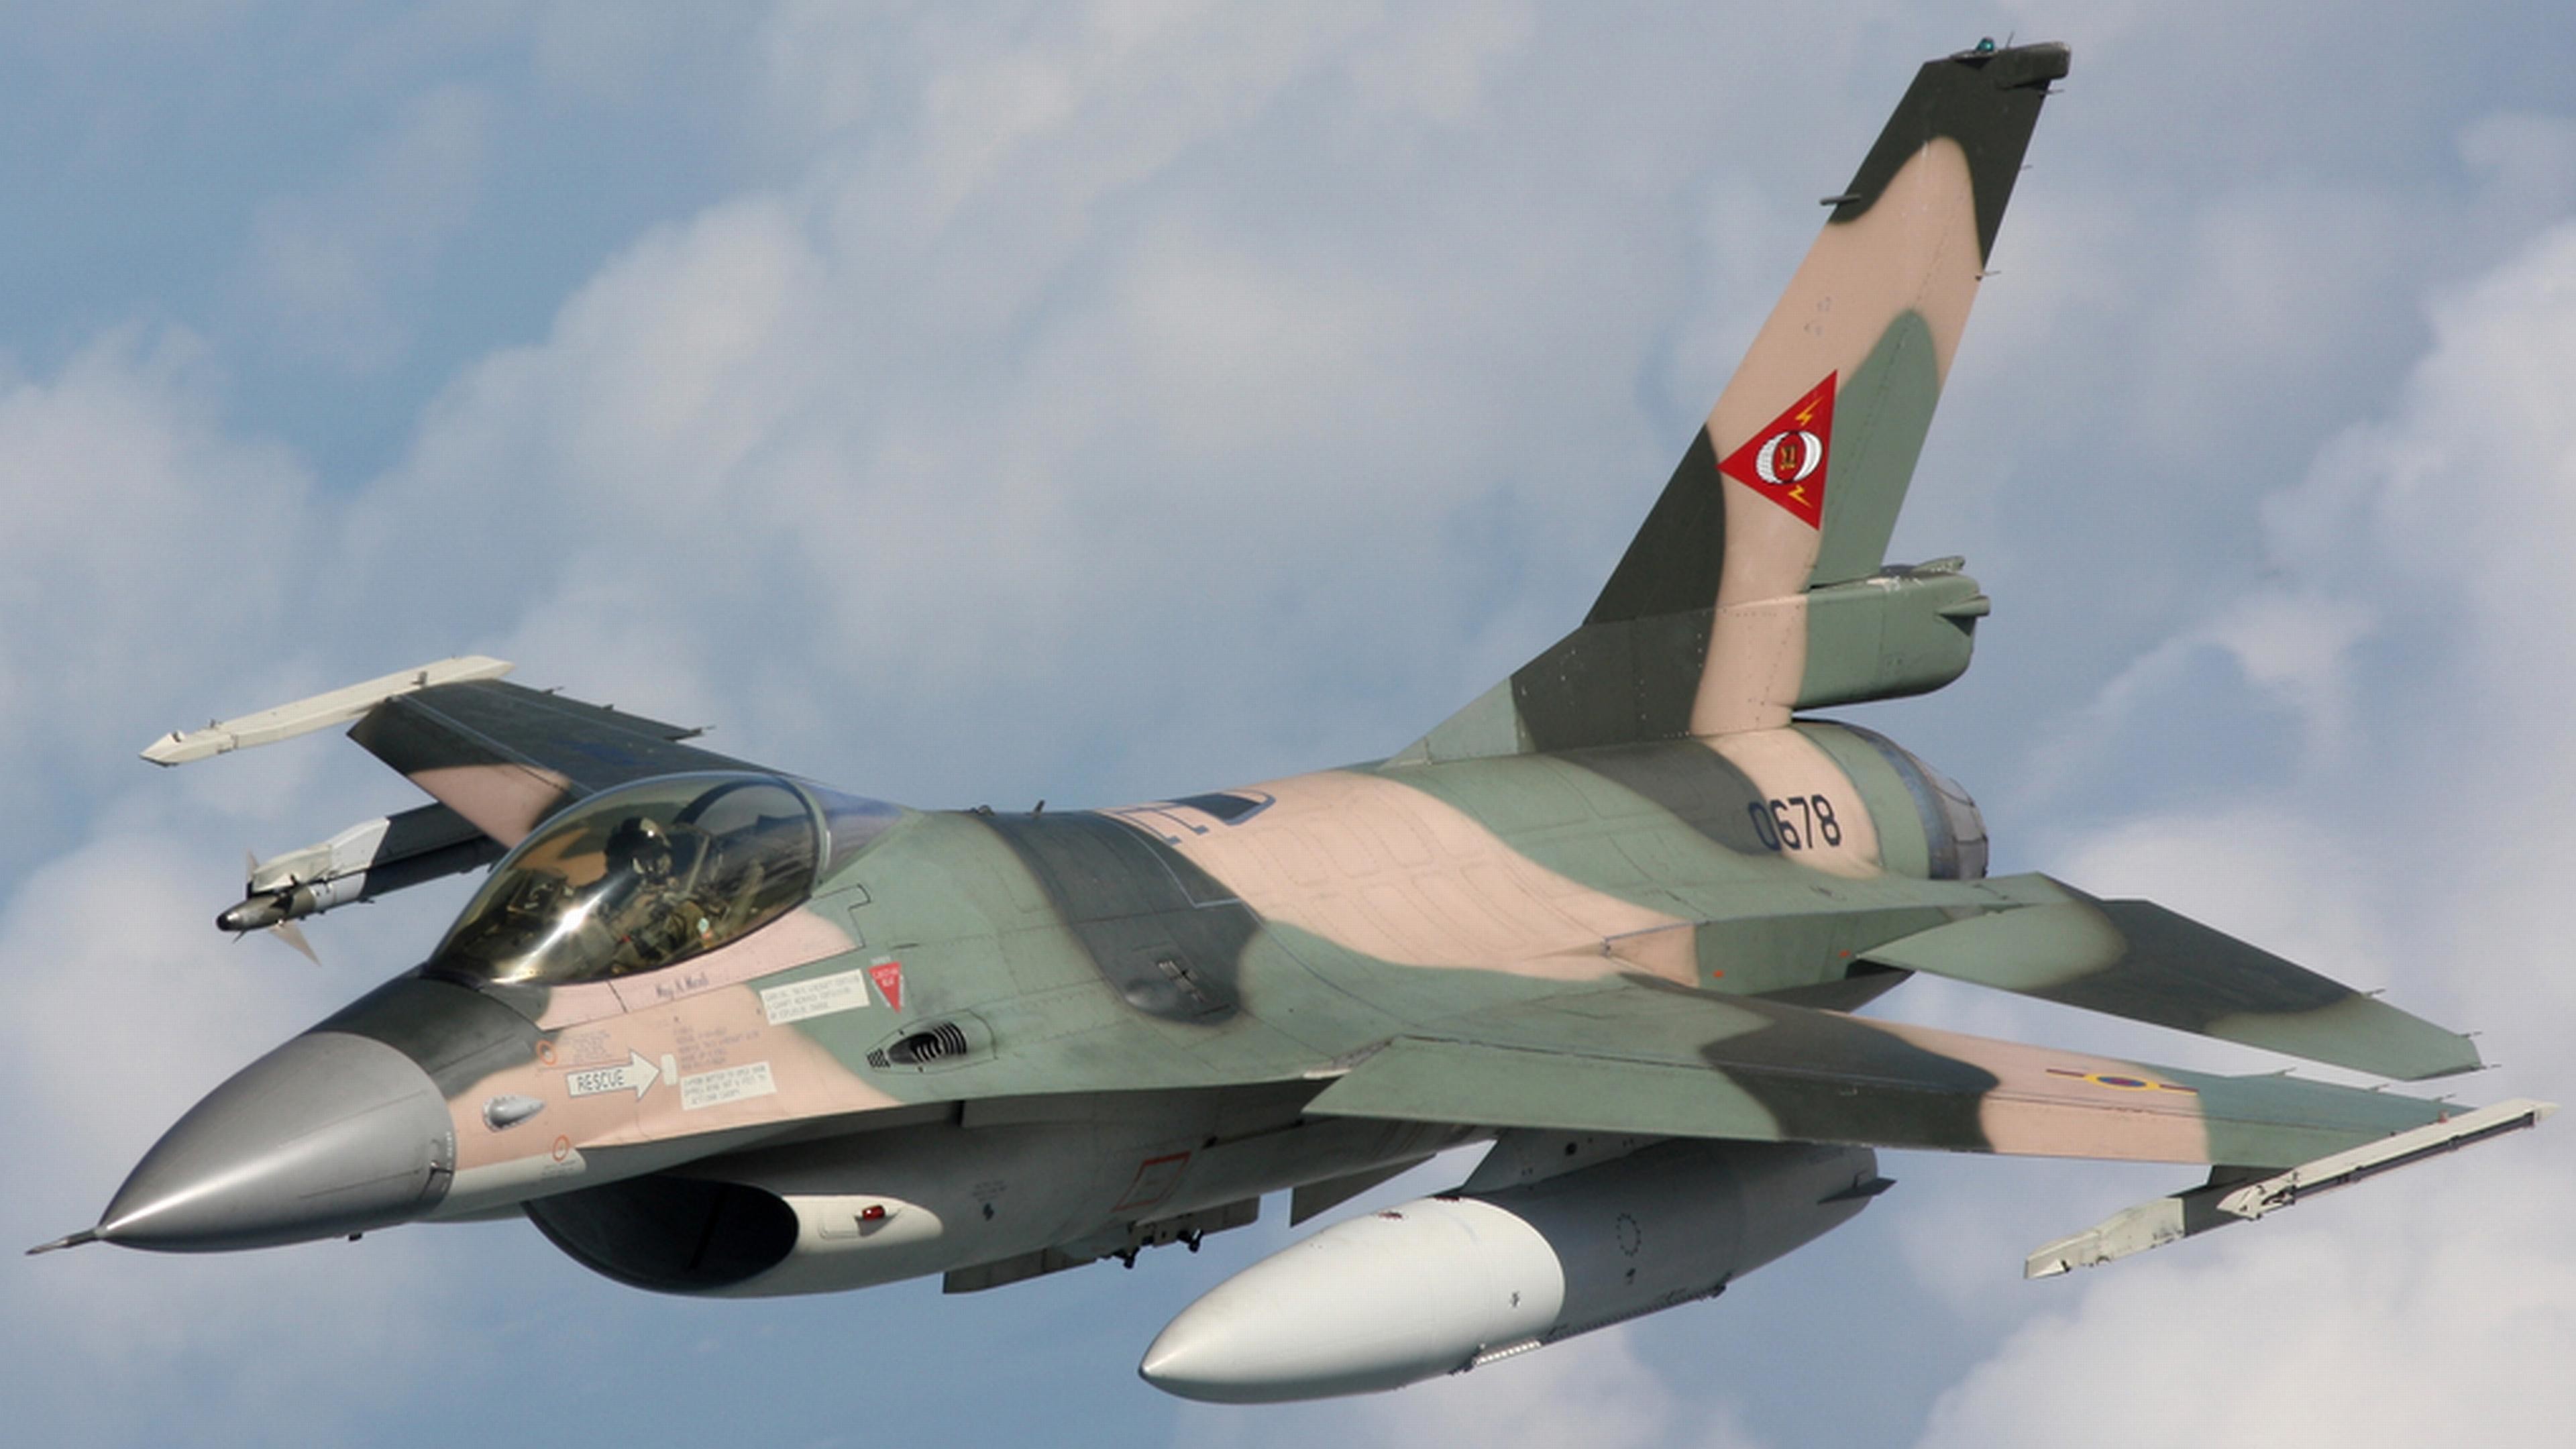 3840x2160 General Dynamics F-16 Fighting Falcon wallpapers for android